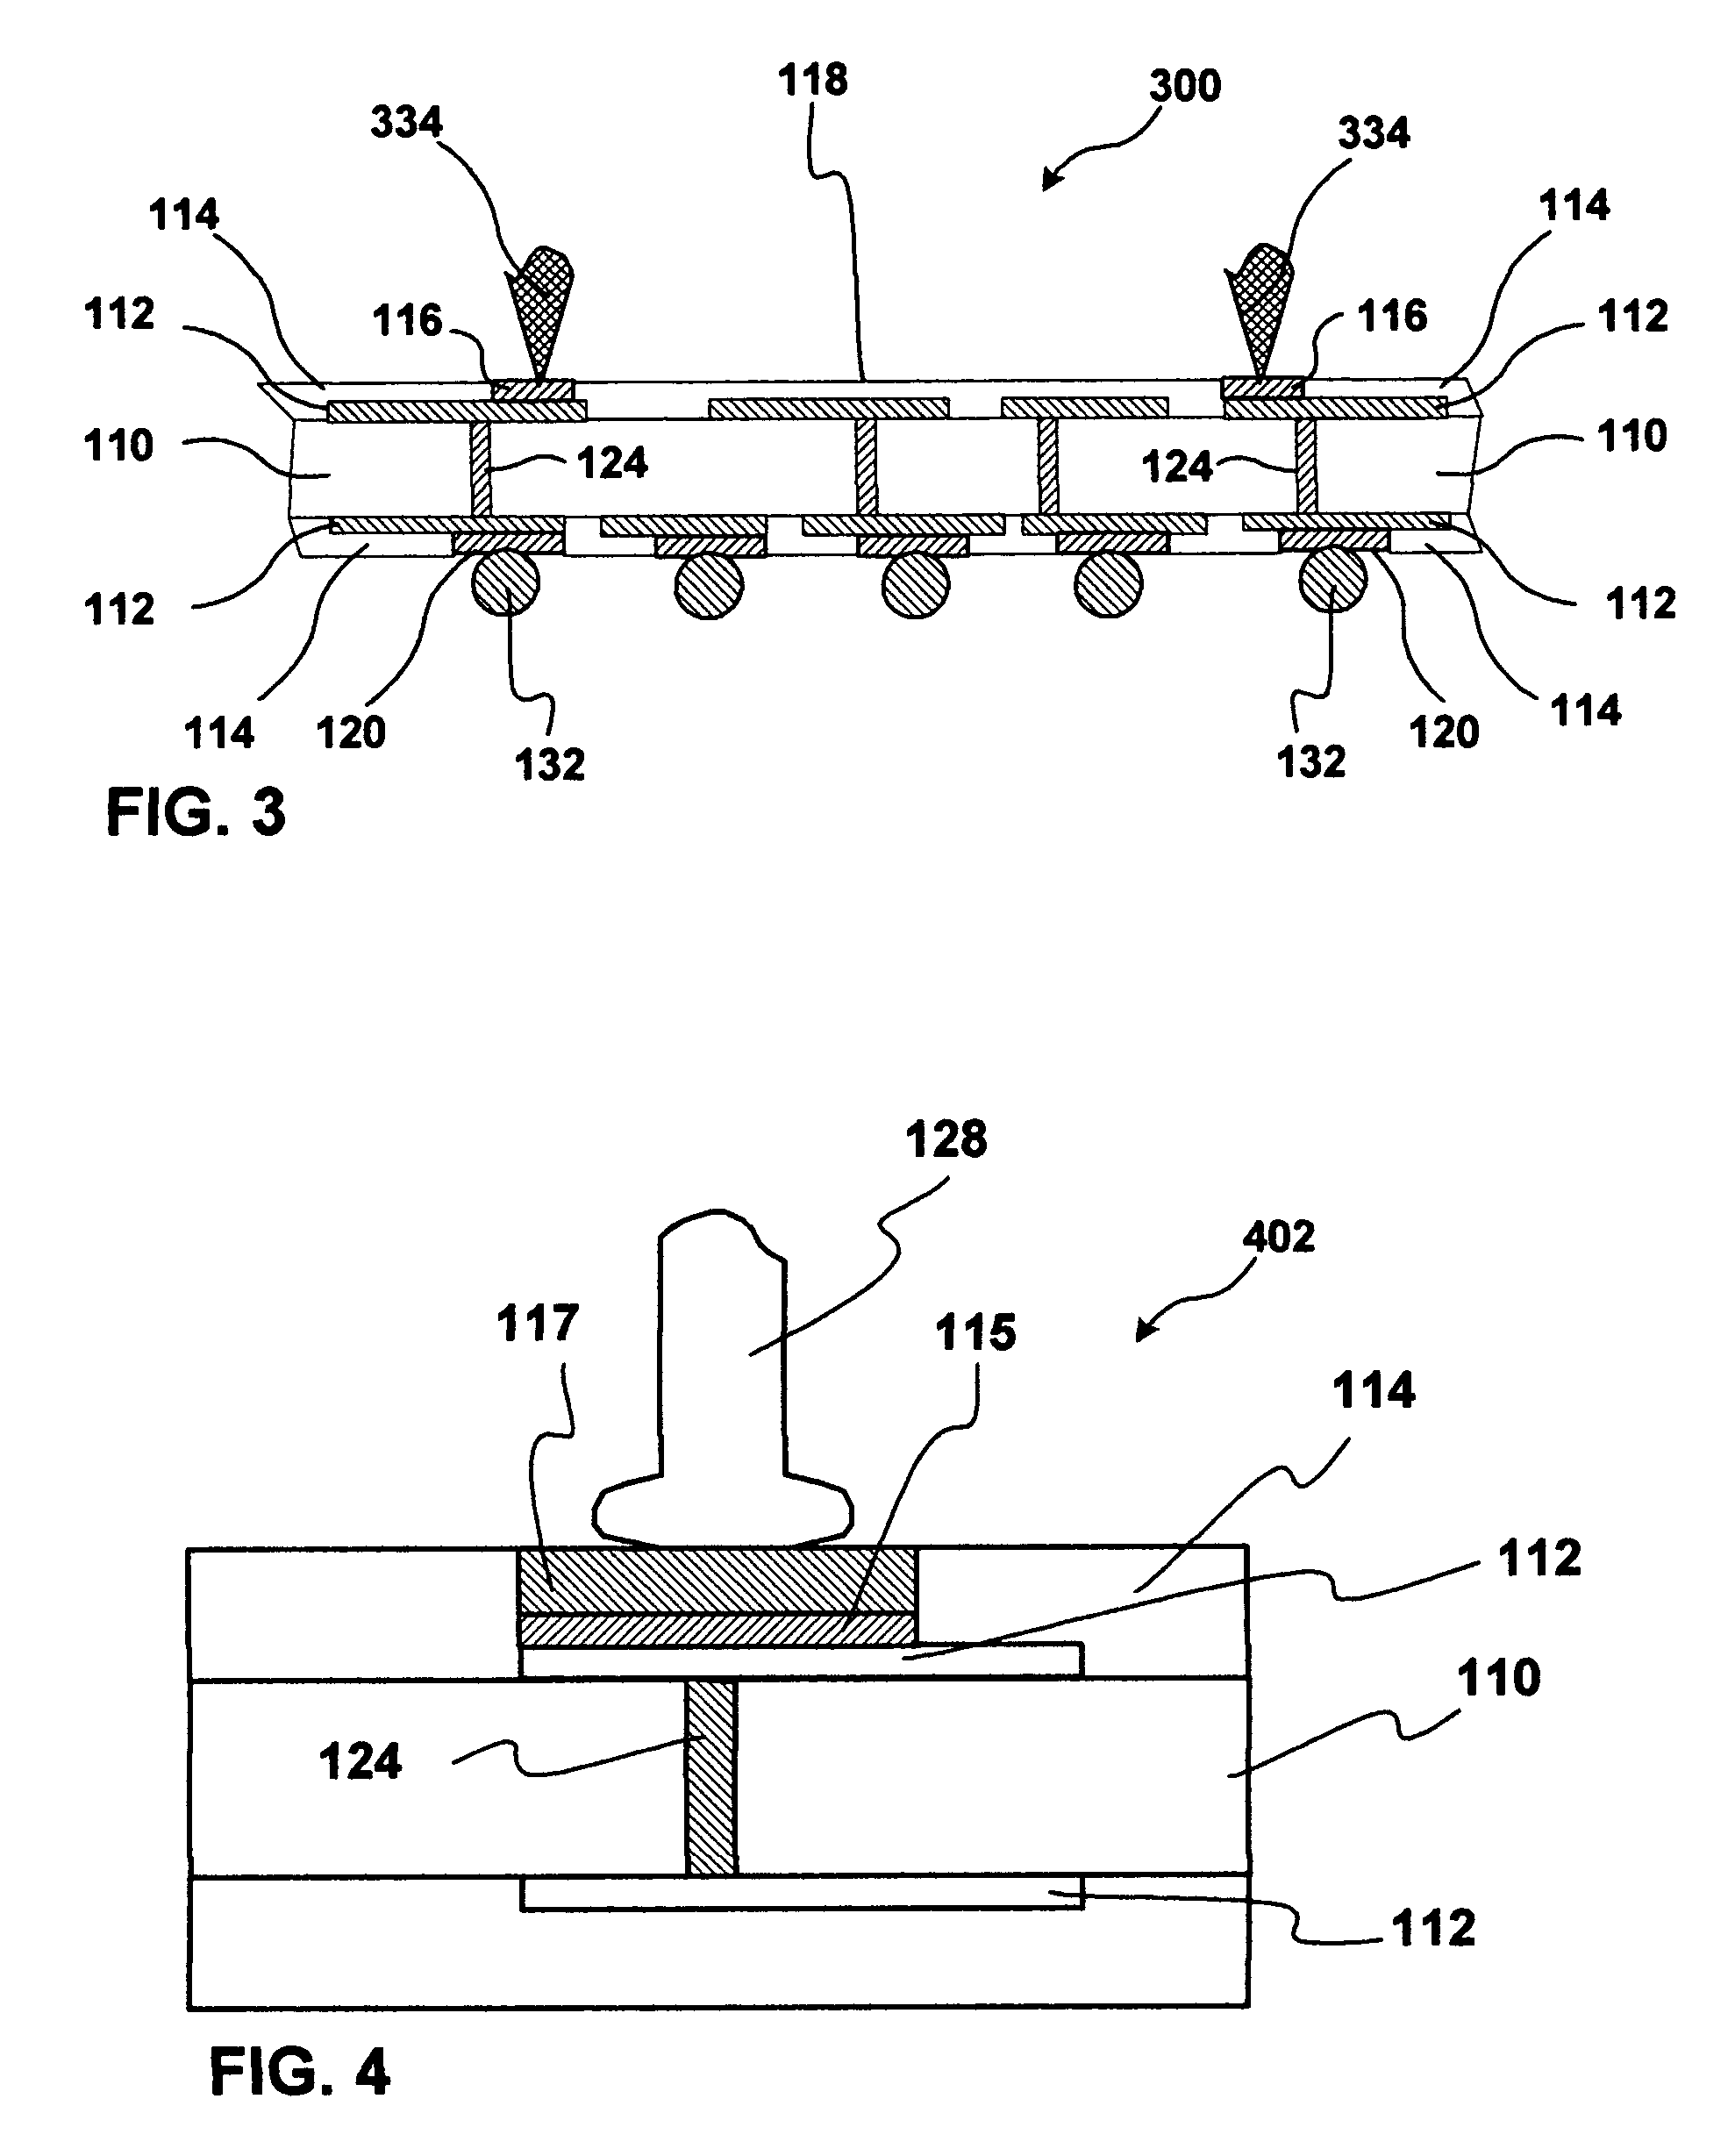 Use of direct gold surface finish on a copper wire-bond substrate, methods of making same, and methods of testing same